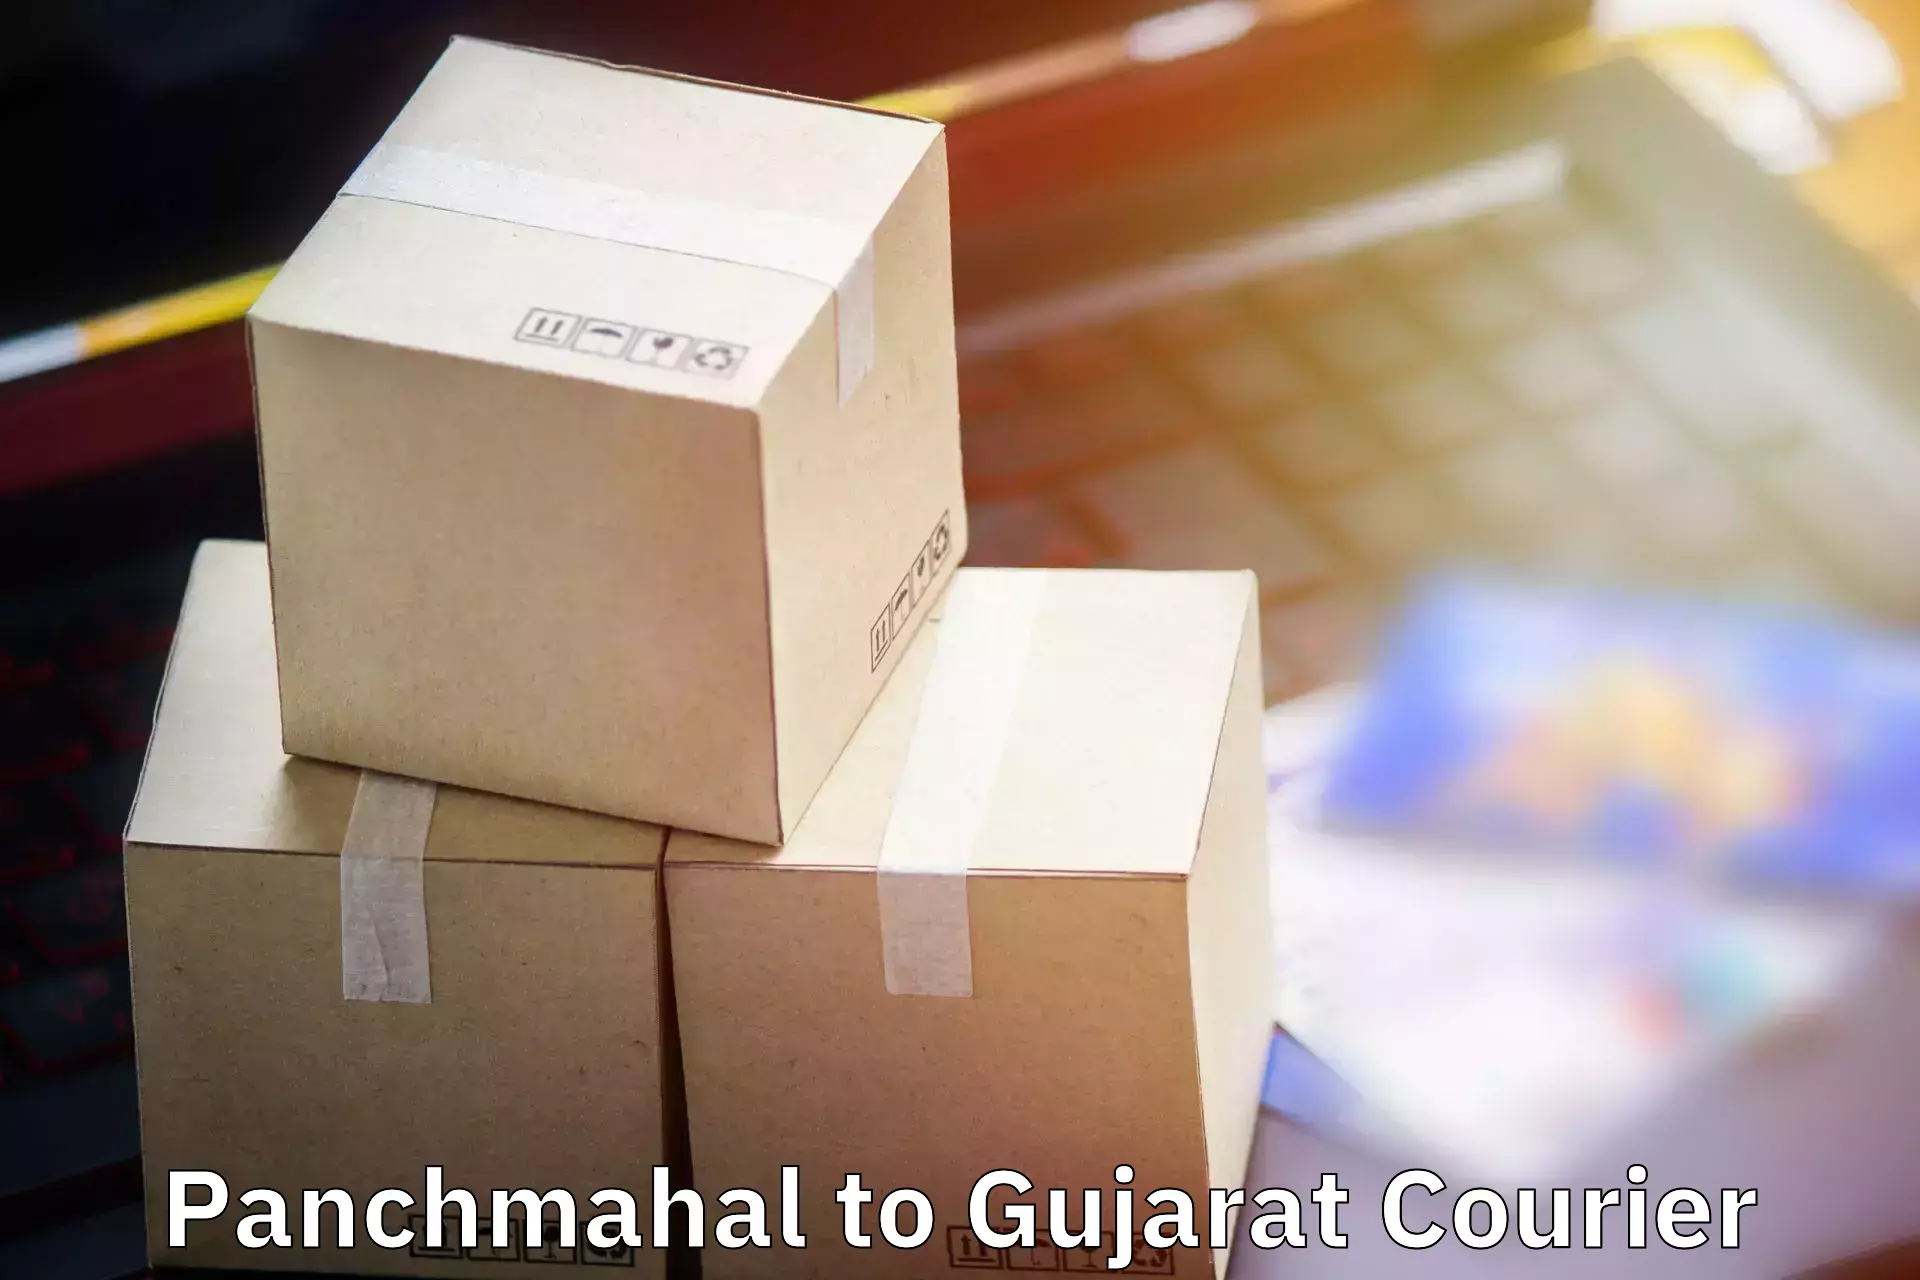 Baggage transport network Panchmahal to Surat